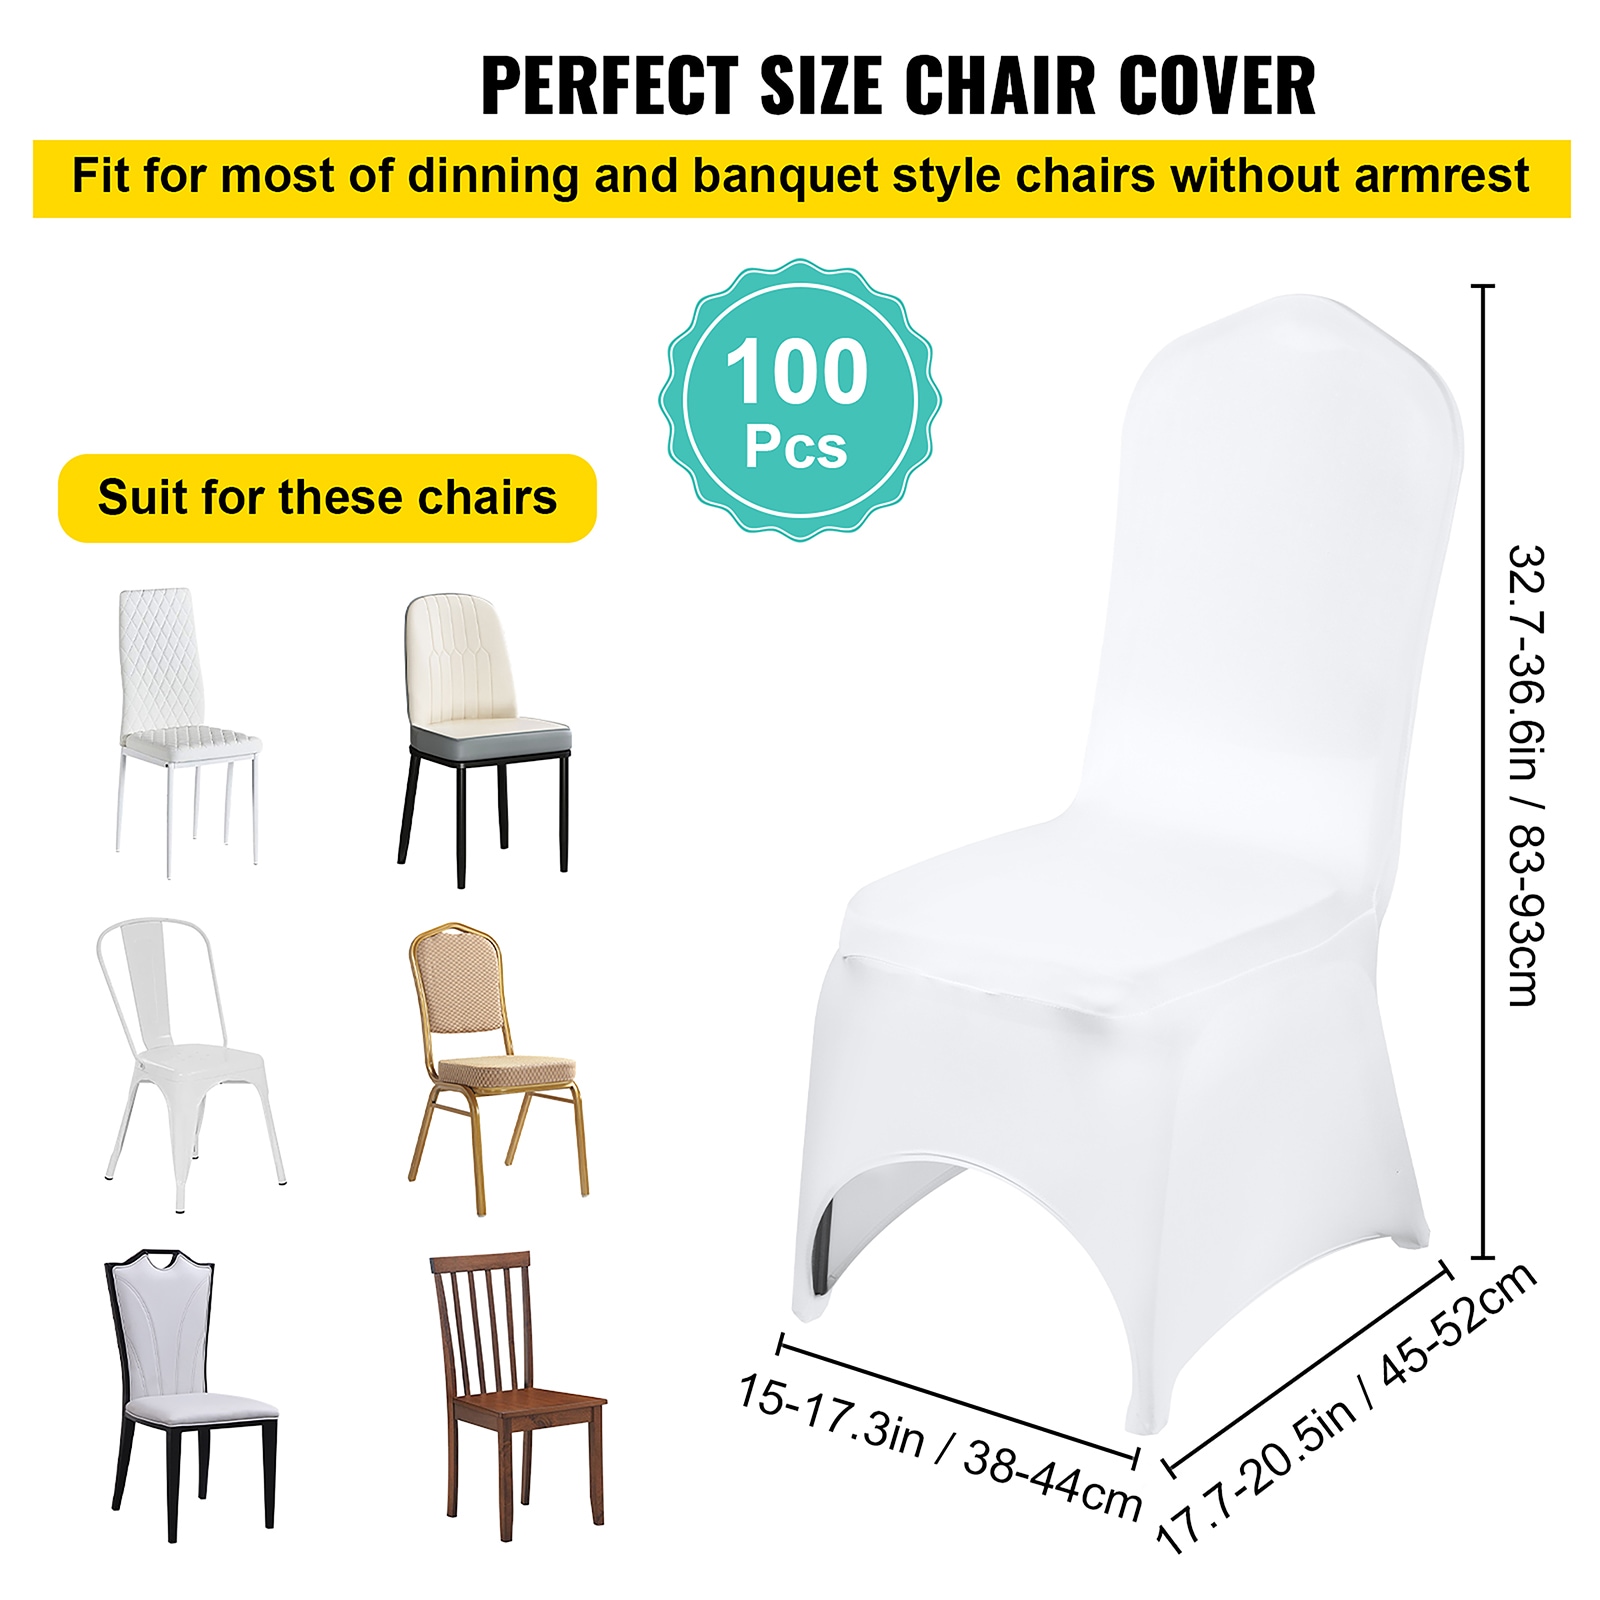 Stretchy Fabric Oval Back Chair Slipcovers - Spandex Chair Cover - Stretch  Chair Cover for Reception, Dining, Office, Meeting Covers